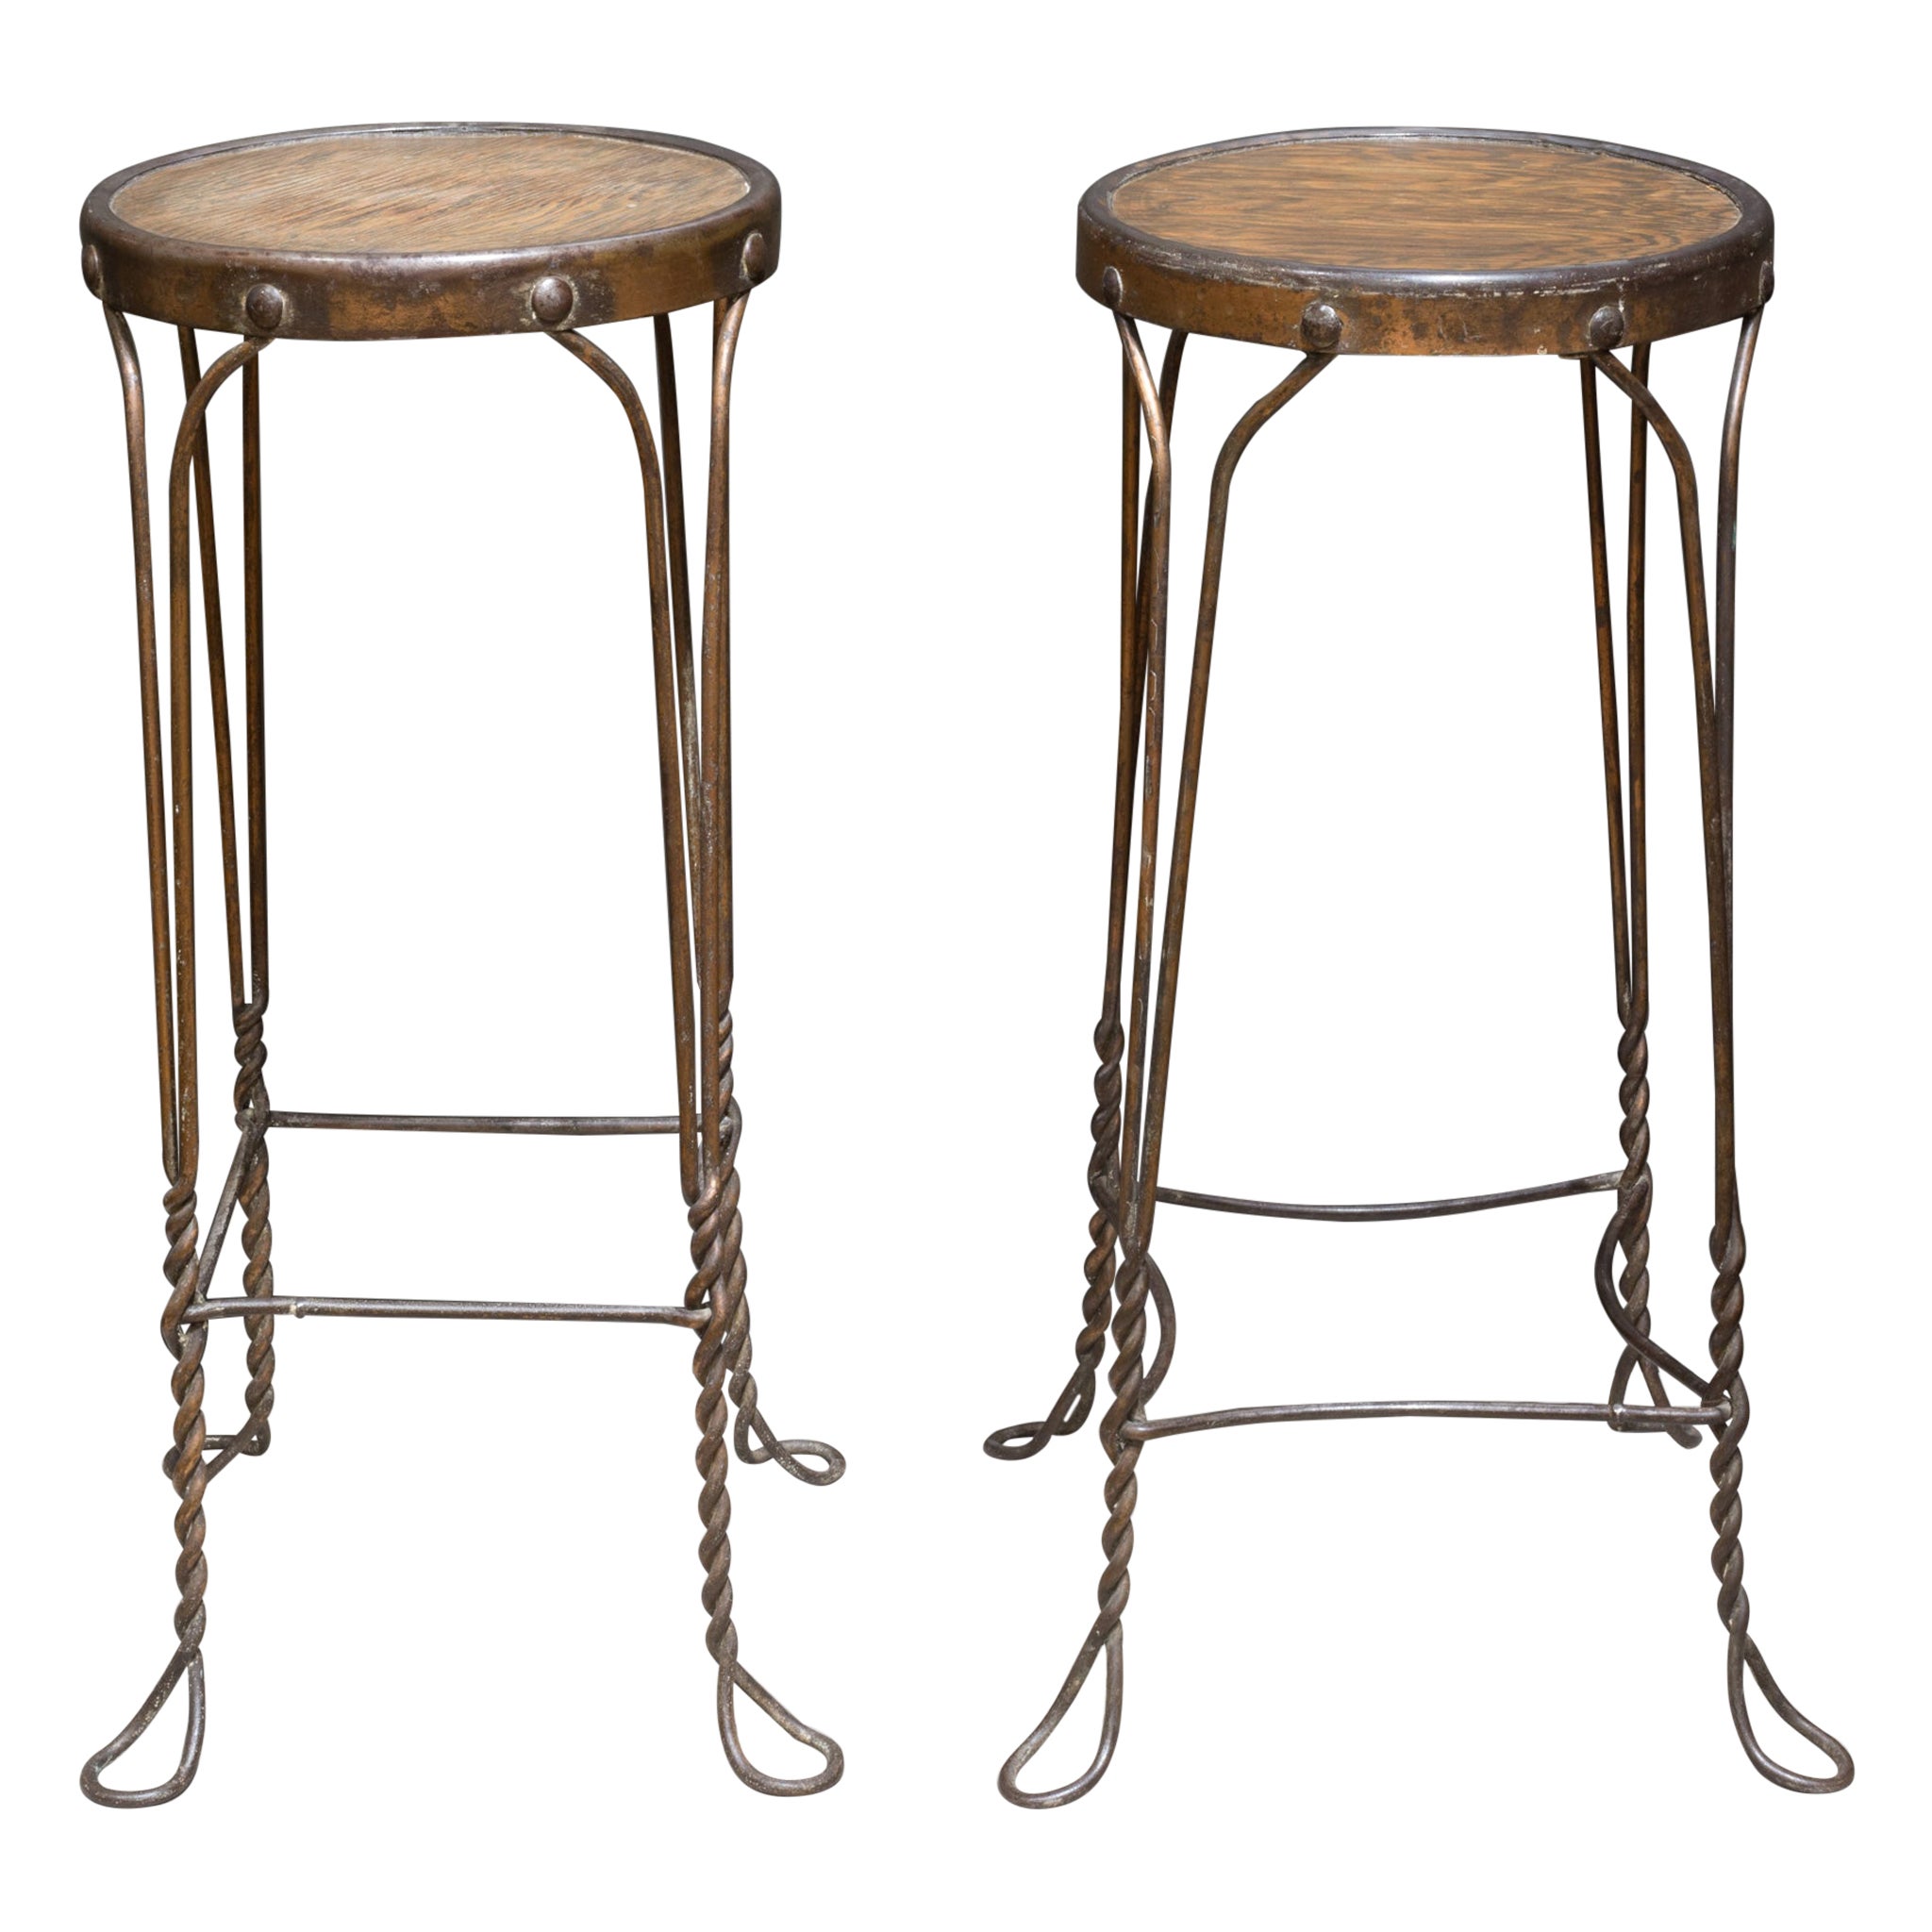 Late 19th/Early 20th c. Ice Cream Parlor Copper Plated Wire Stools c.1890-1910